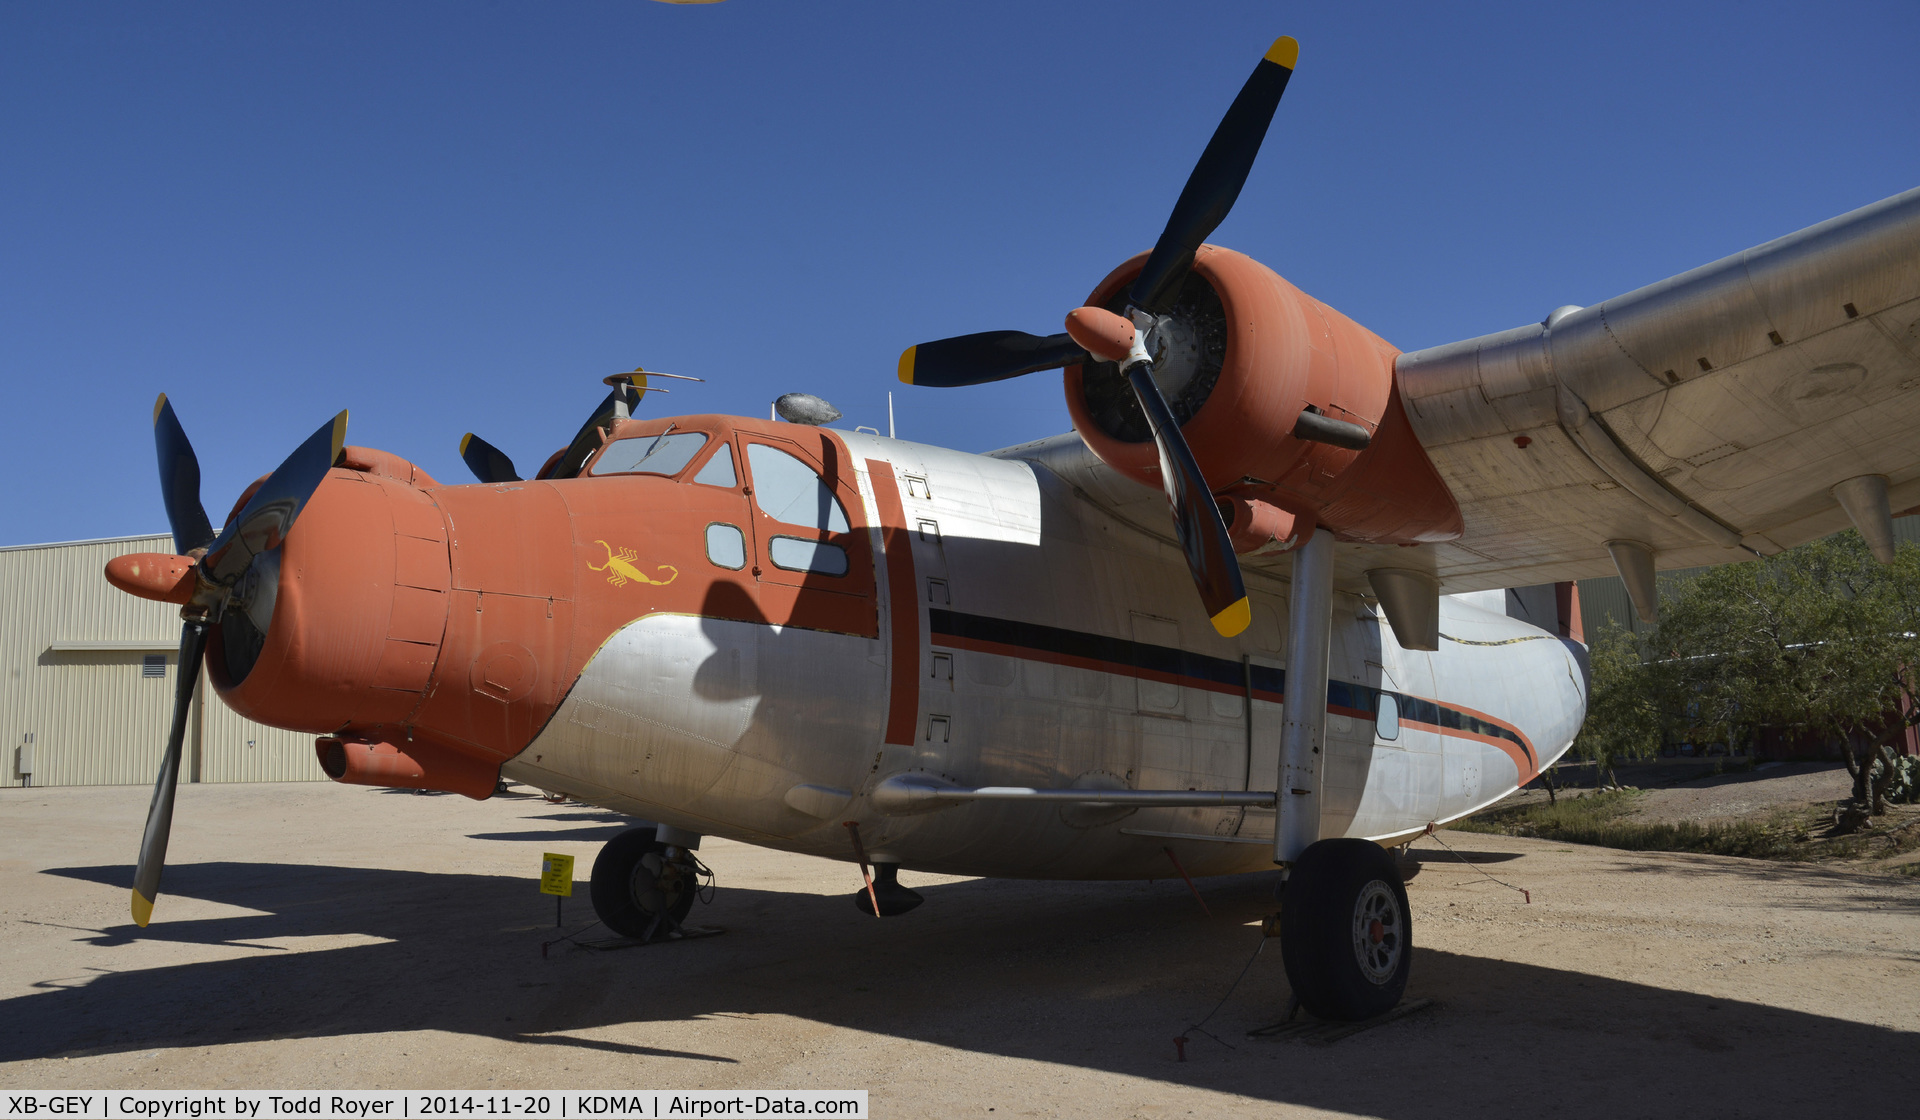 XB-GEY, 1948 Northrop YC-125A Raider C/N 48636 (2520), On display at the Pima Air and Space Museum